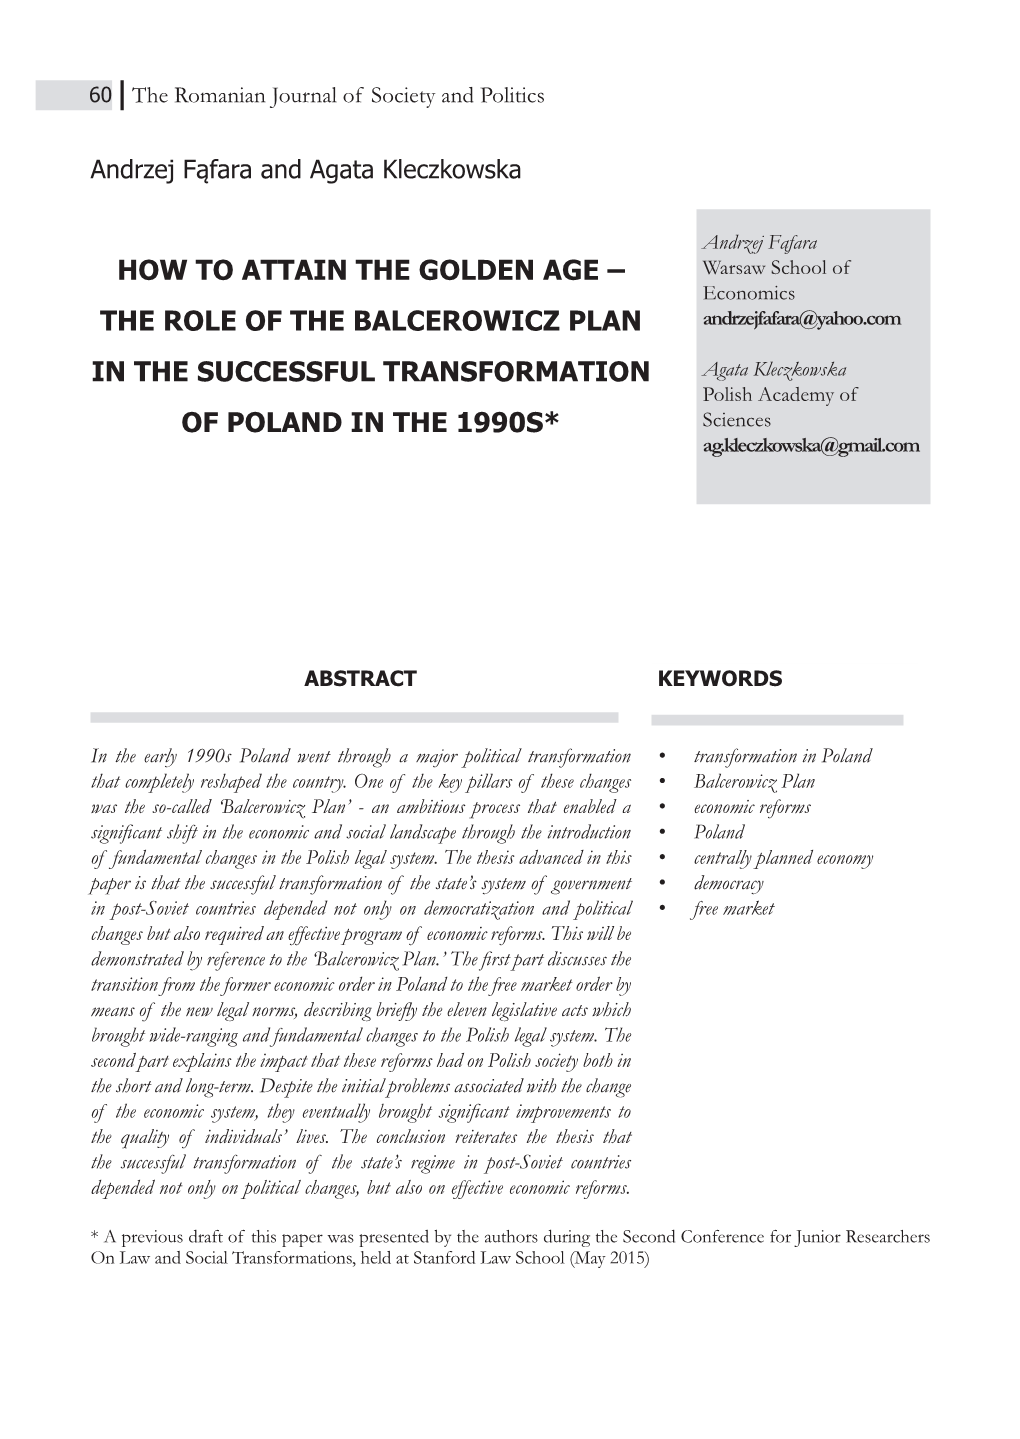 The Role of the Balcerowicz Plan in the Successful